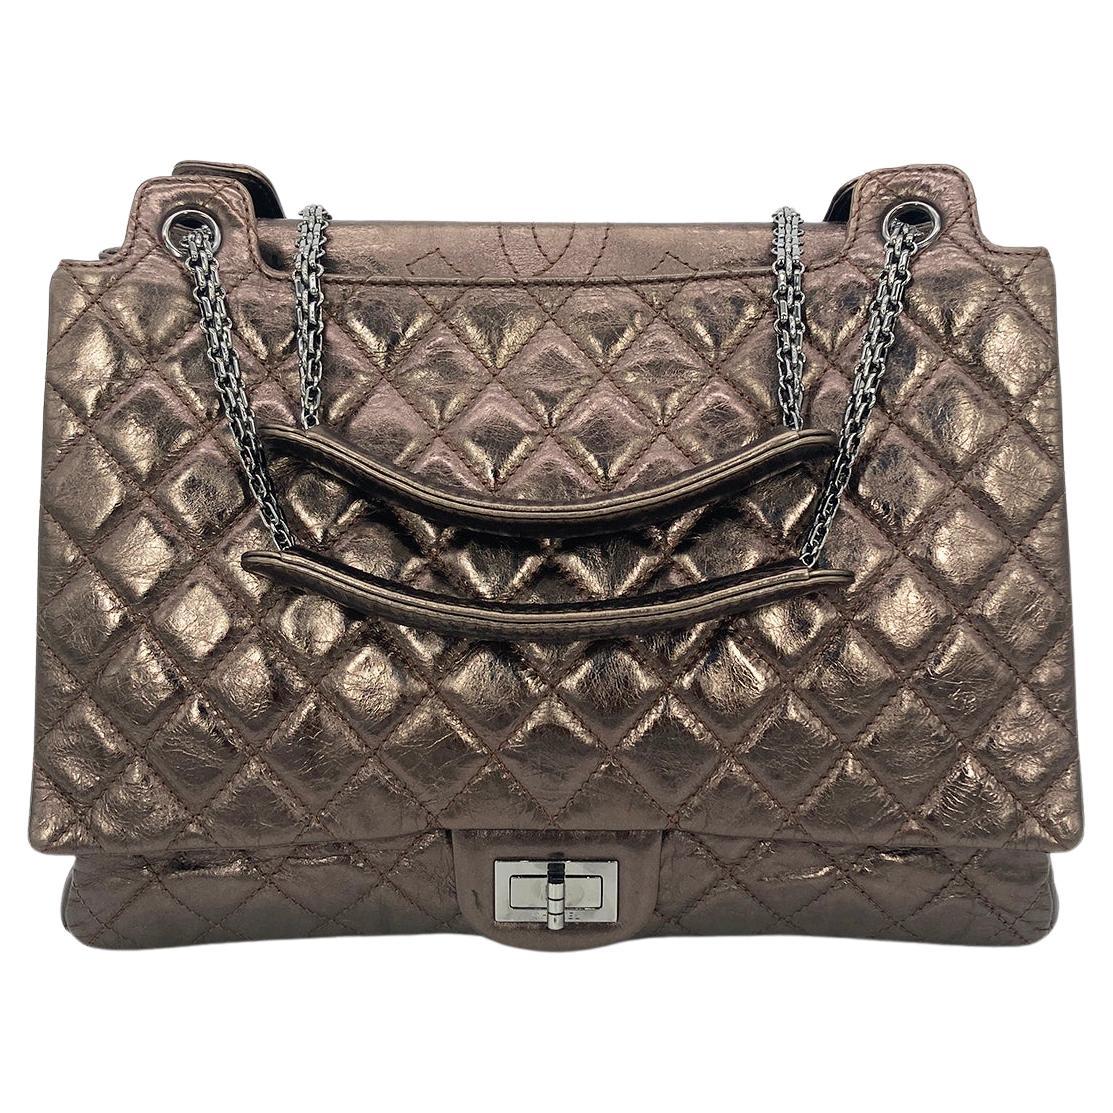 Chanel Metallic Bronze Quilted Leather Classic Flap Shopping Tote For Sale